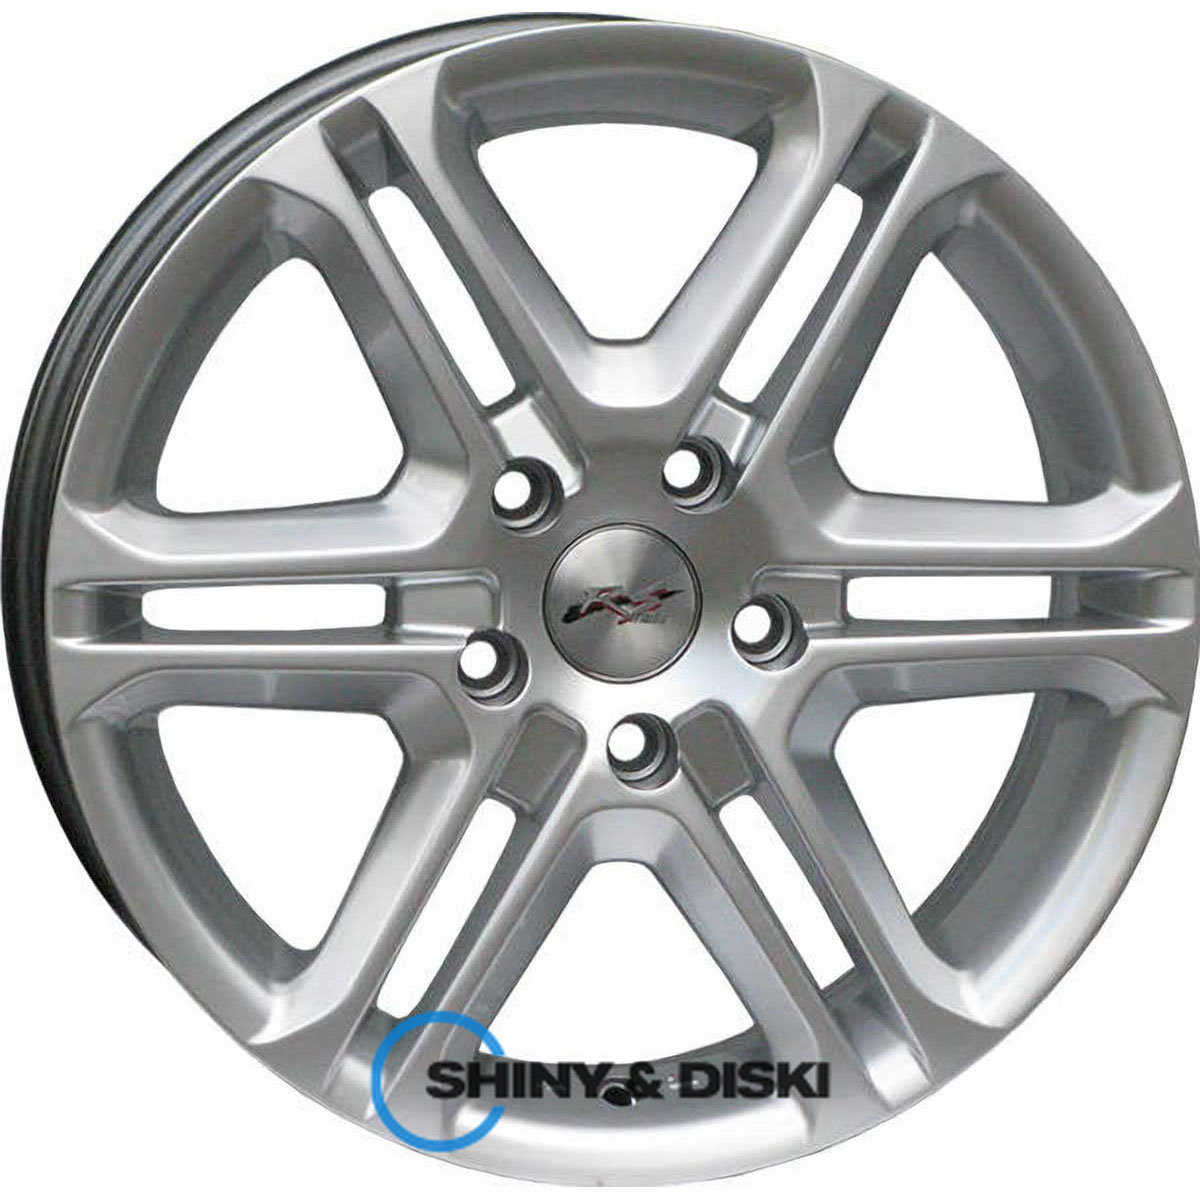 rs tuning 789 hs r15 w6.5 pcd5x112 et38 dia66.6